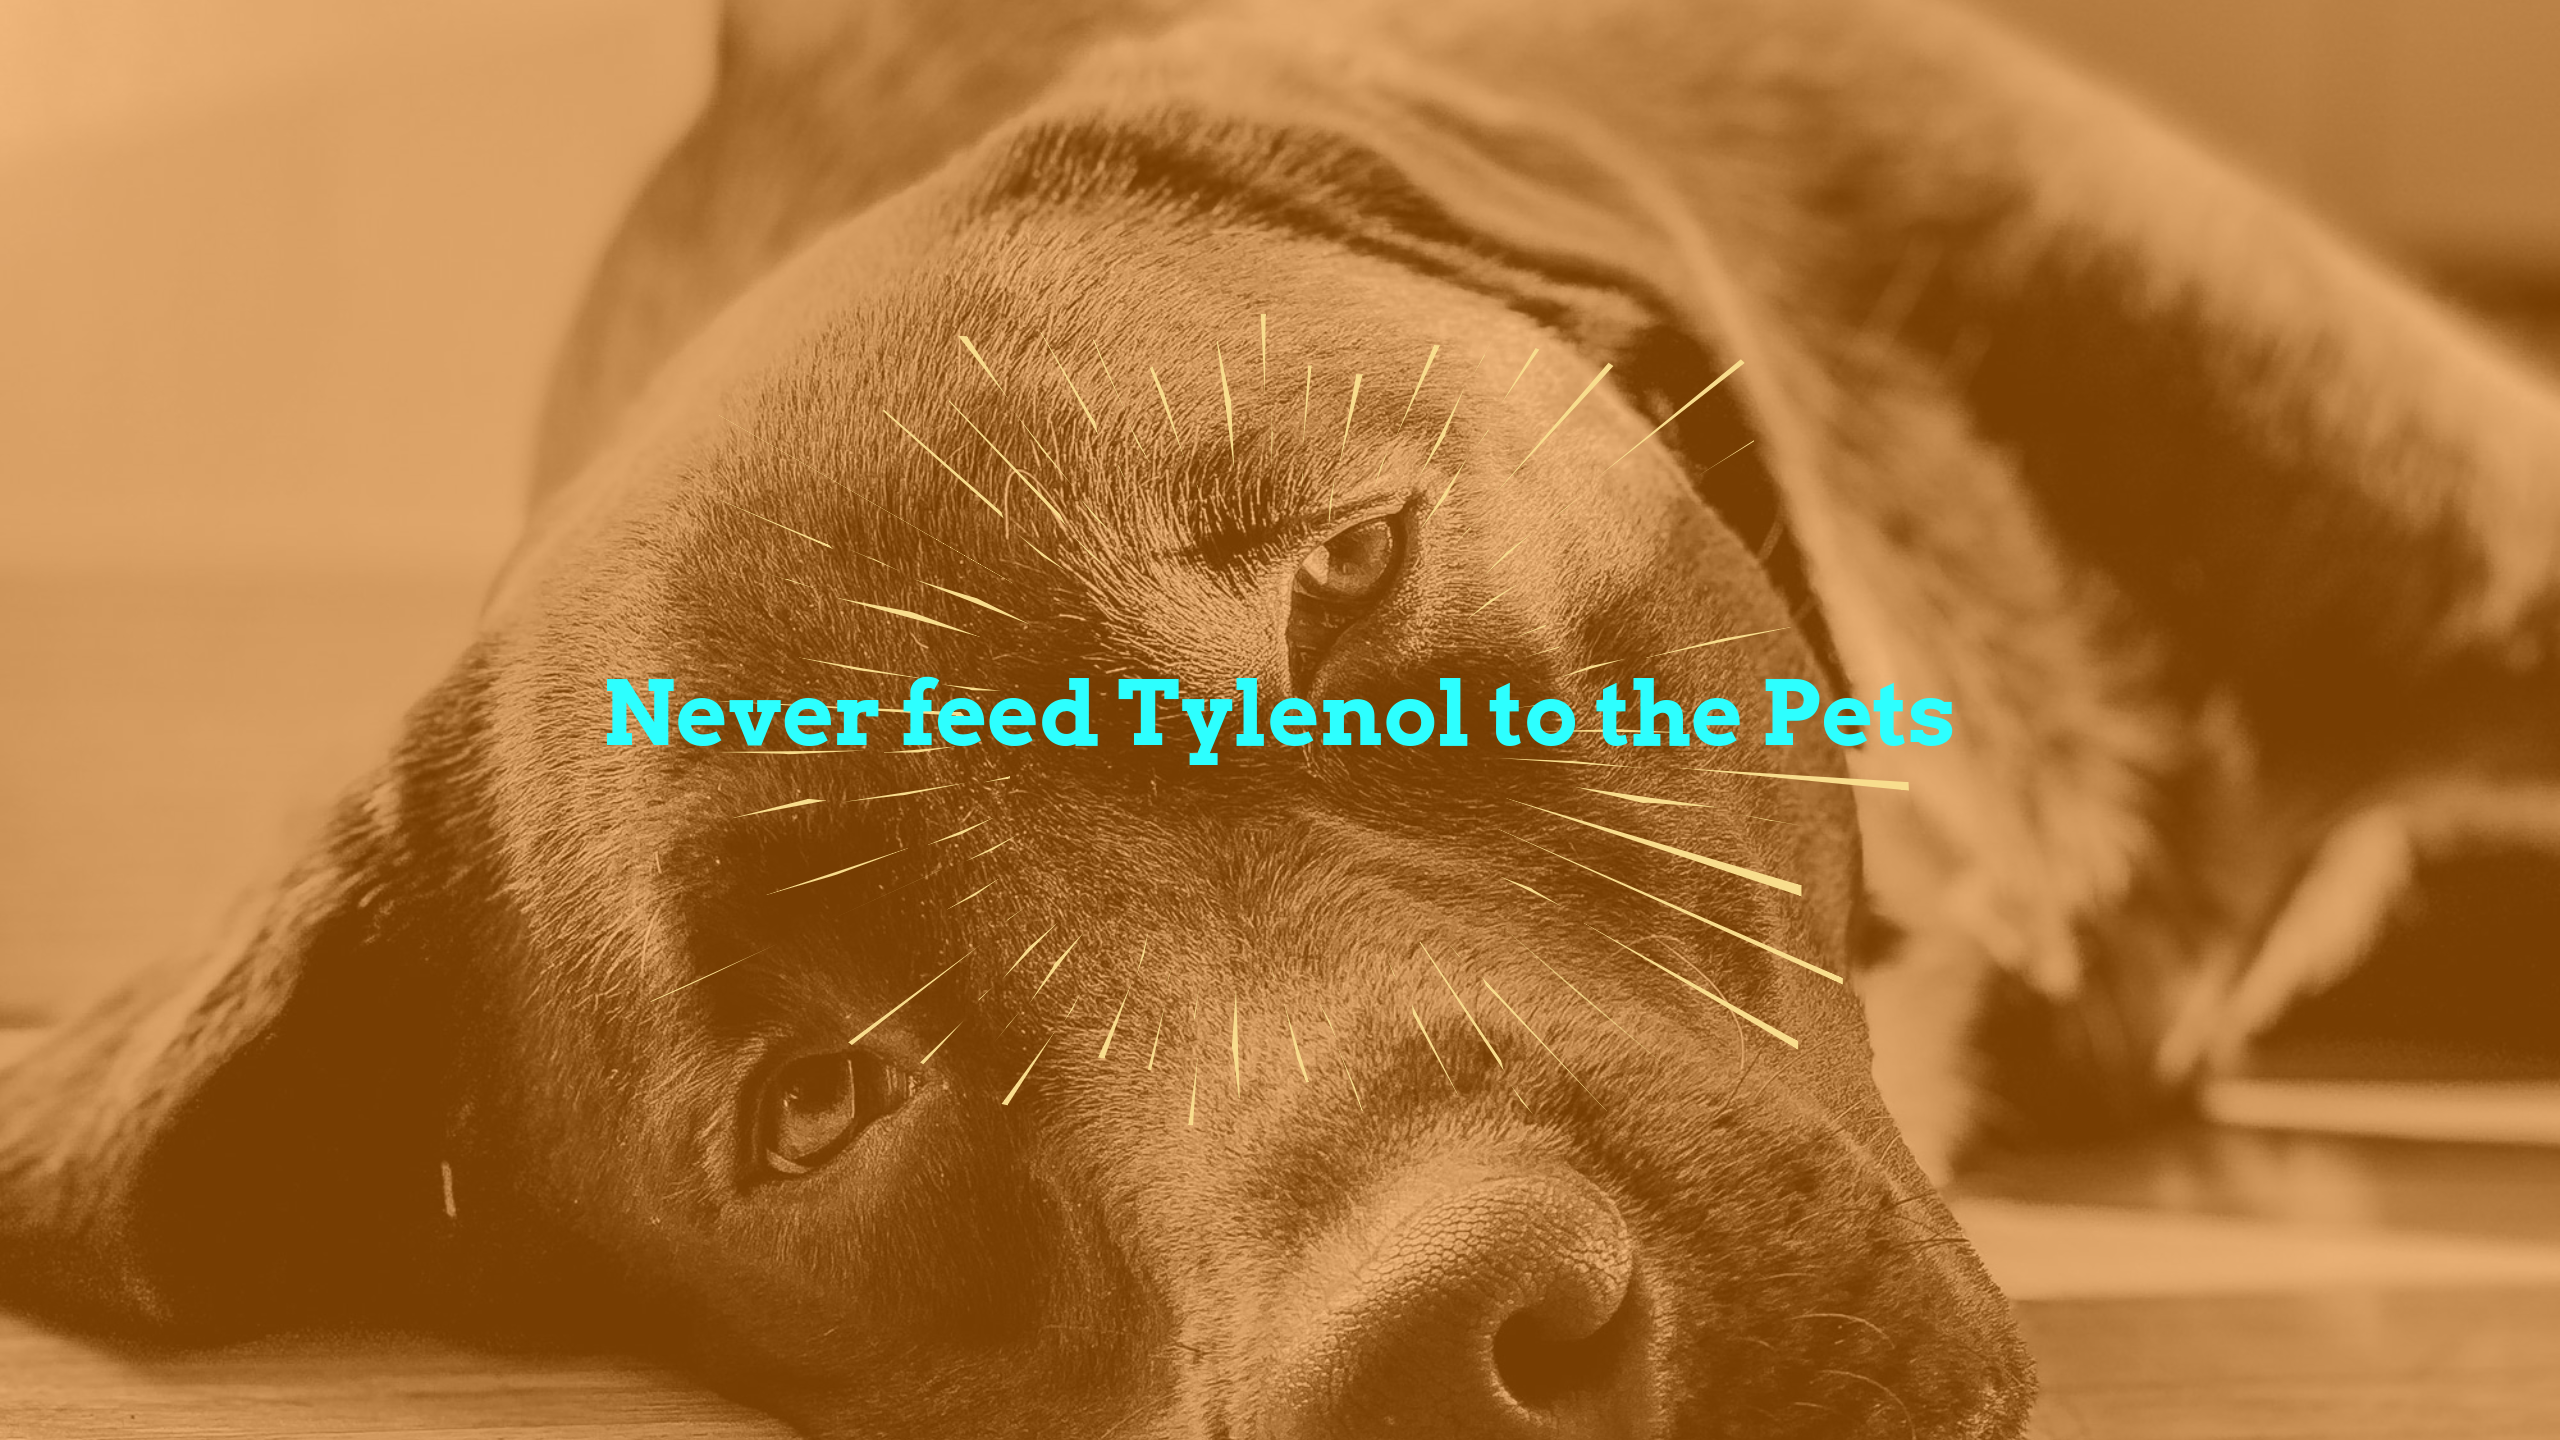 Never feed Tylenol to dogs and cats!